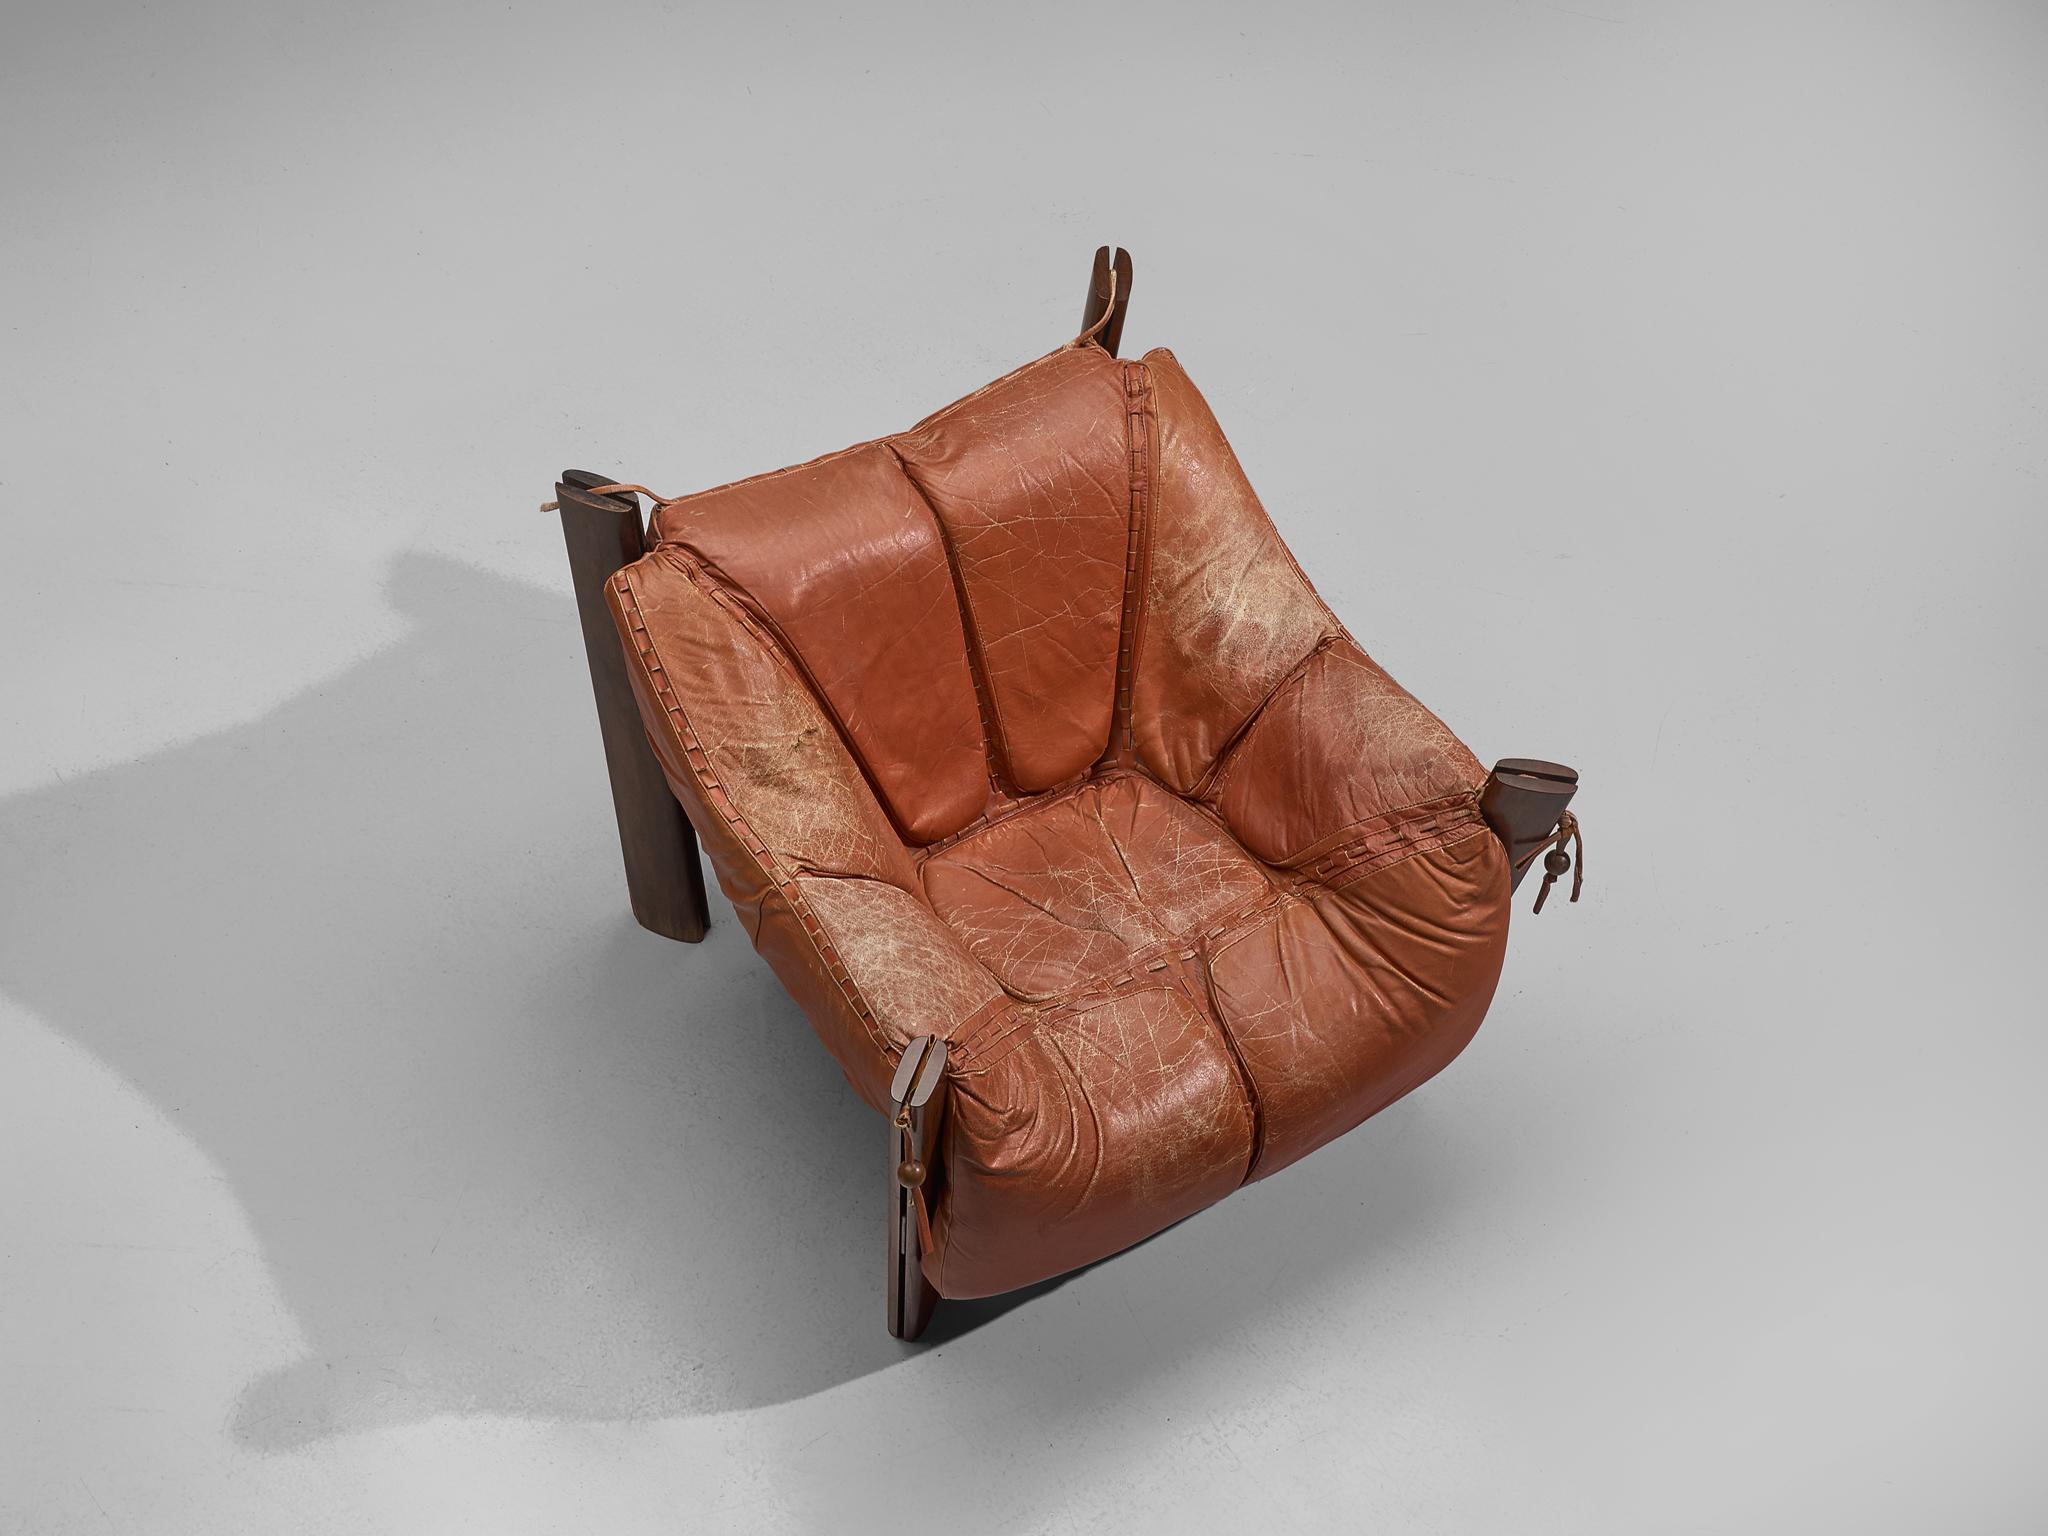 Brazilian Percival Lafer Lounge Chair with Ottoman and Terracotta Leather